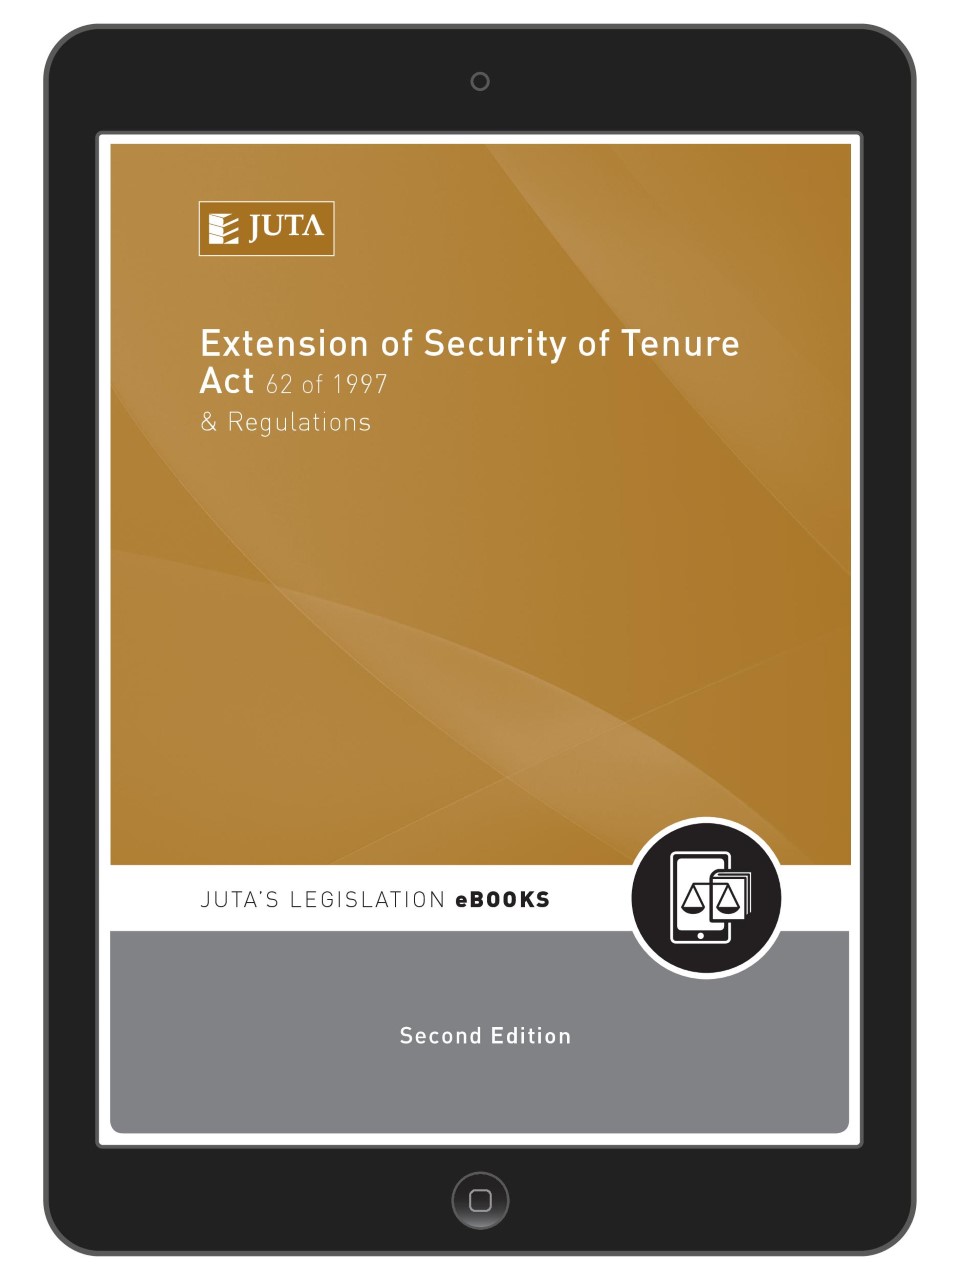 Extension of Security of Tenure Act 62 of 1997 & Regulations